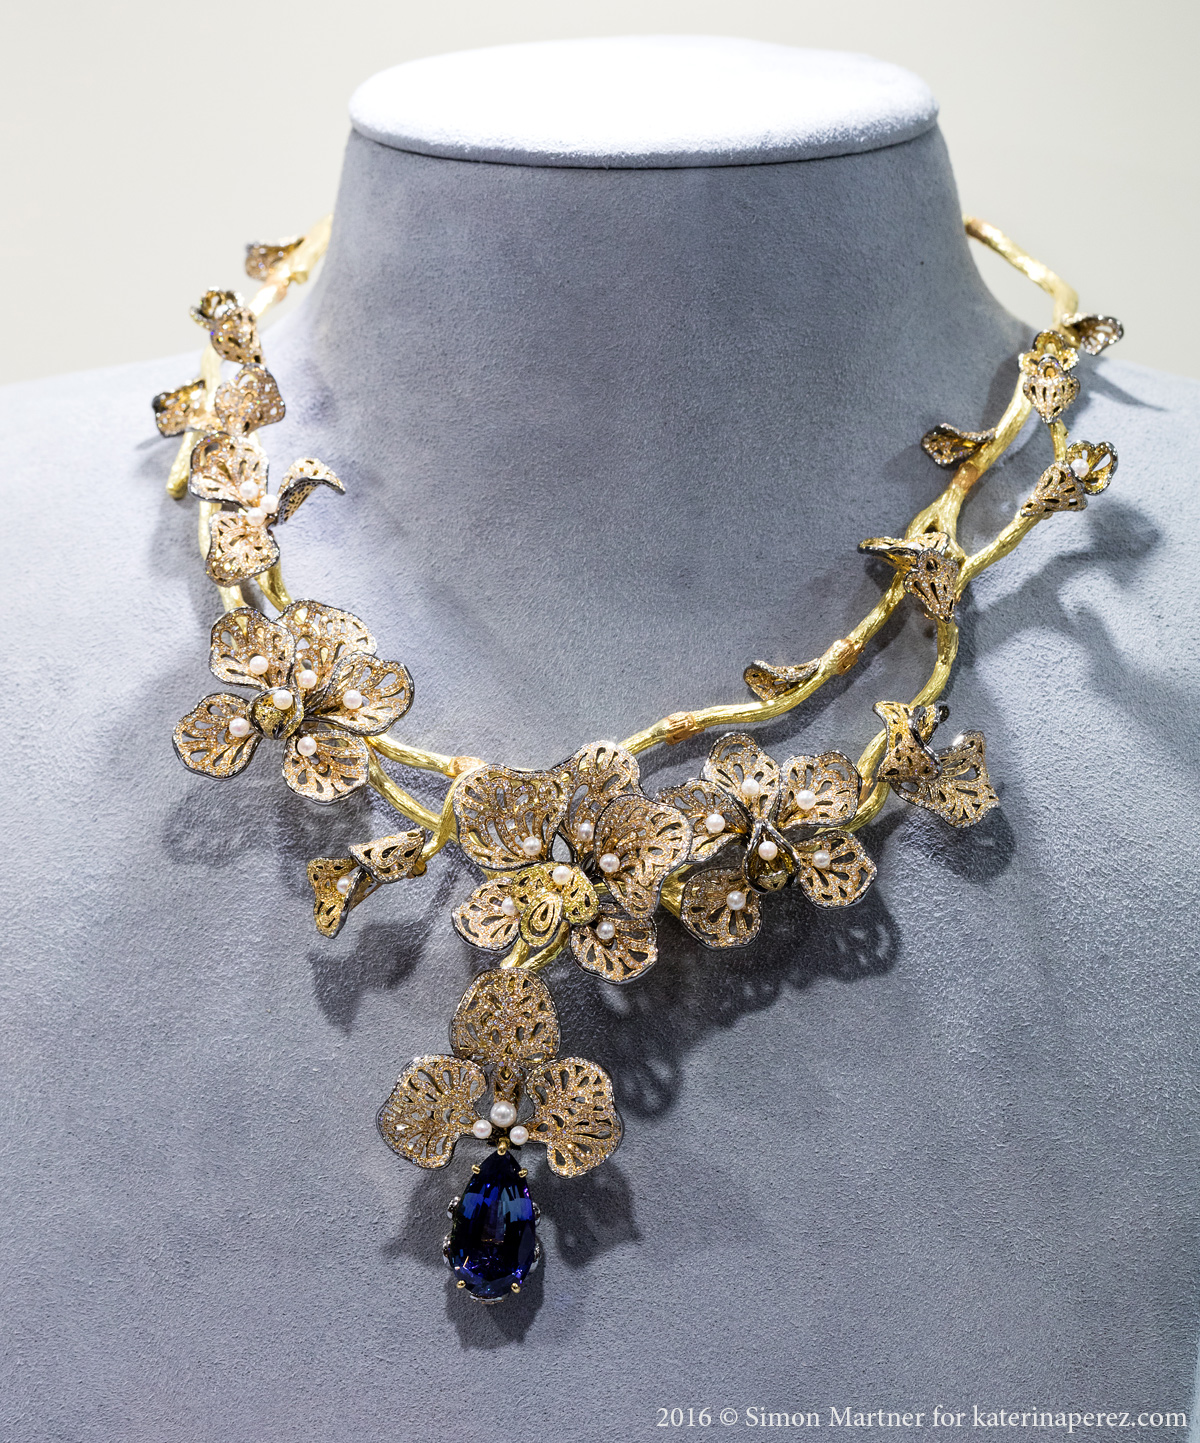 Caratell Orchid necklace with tanzanite, pearls and diamonds